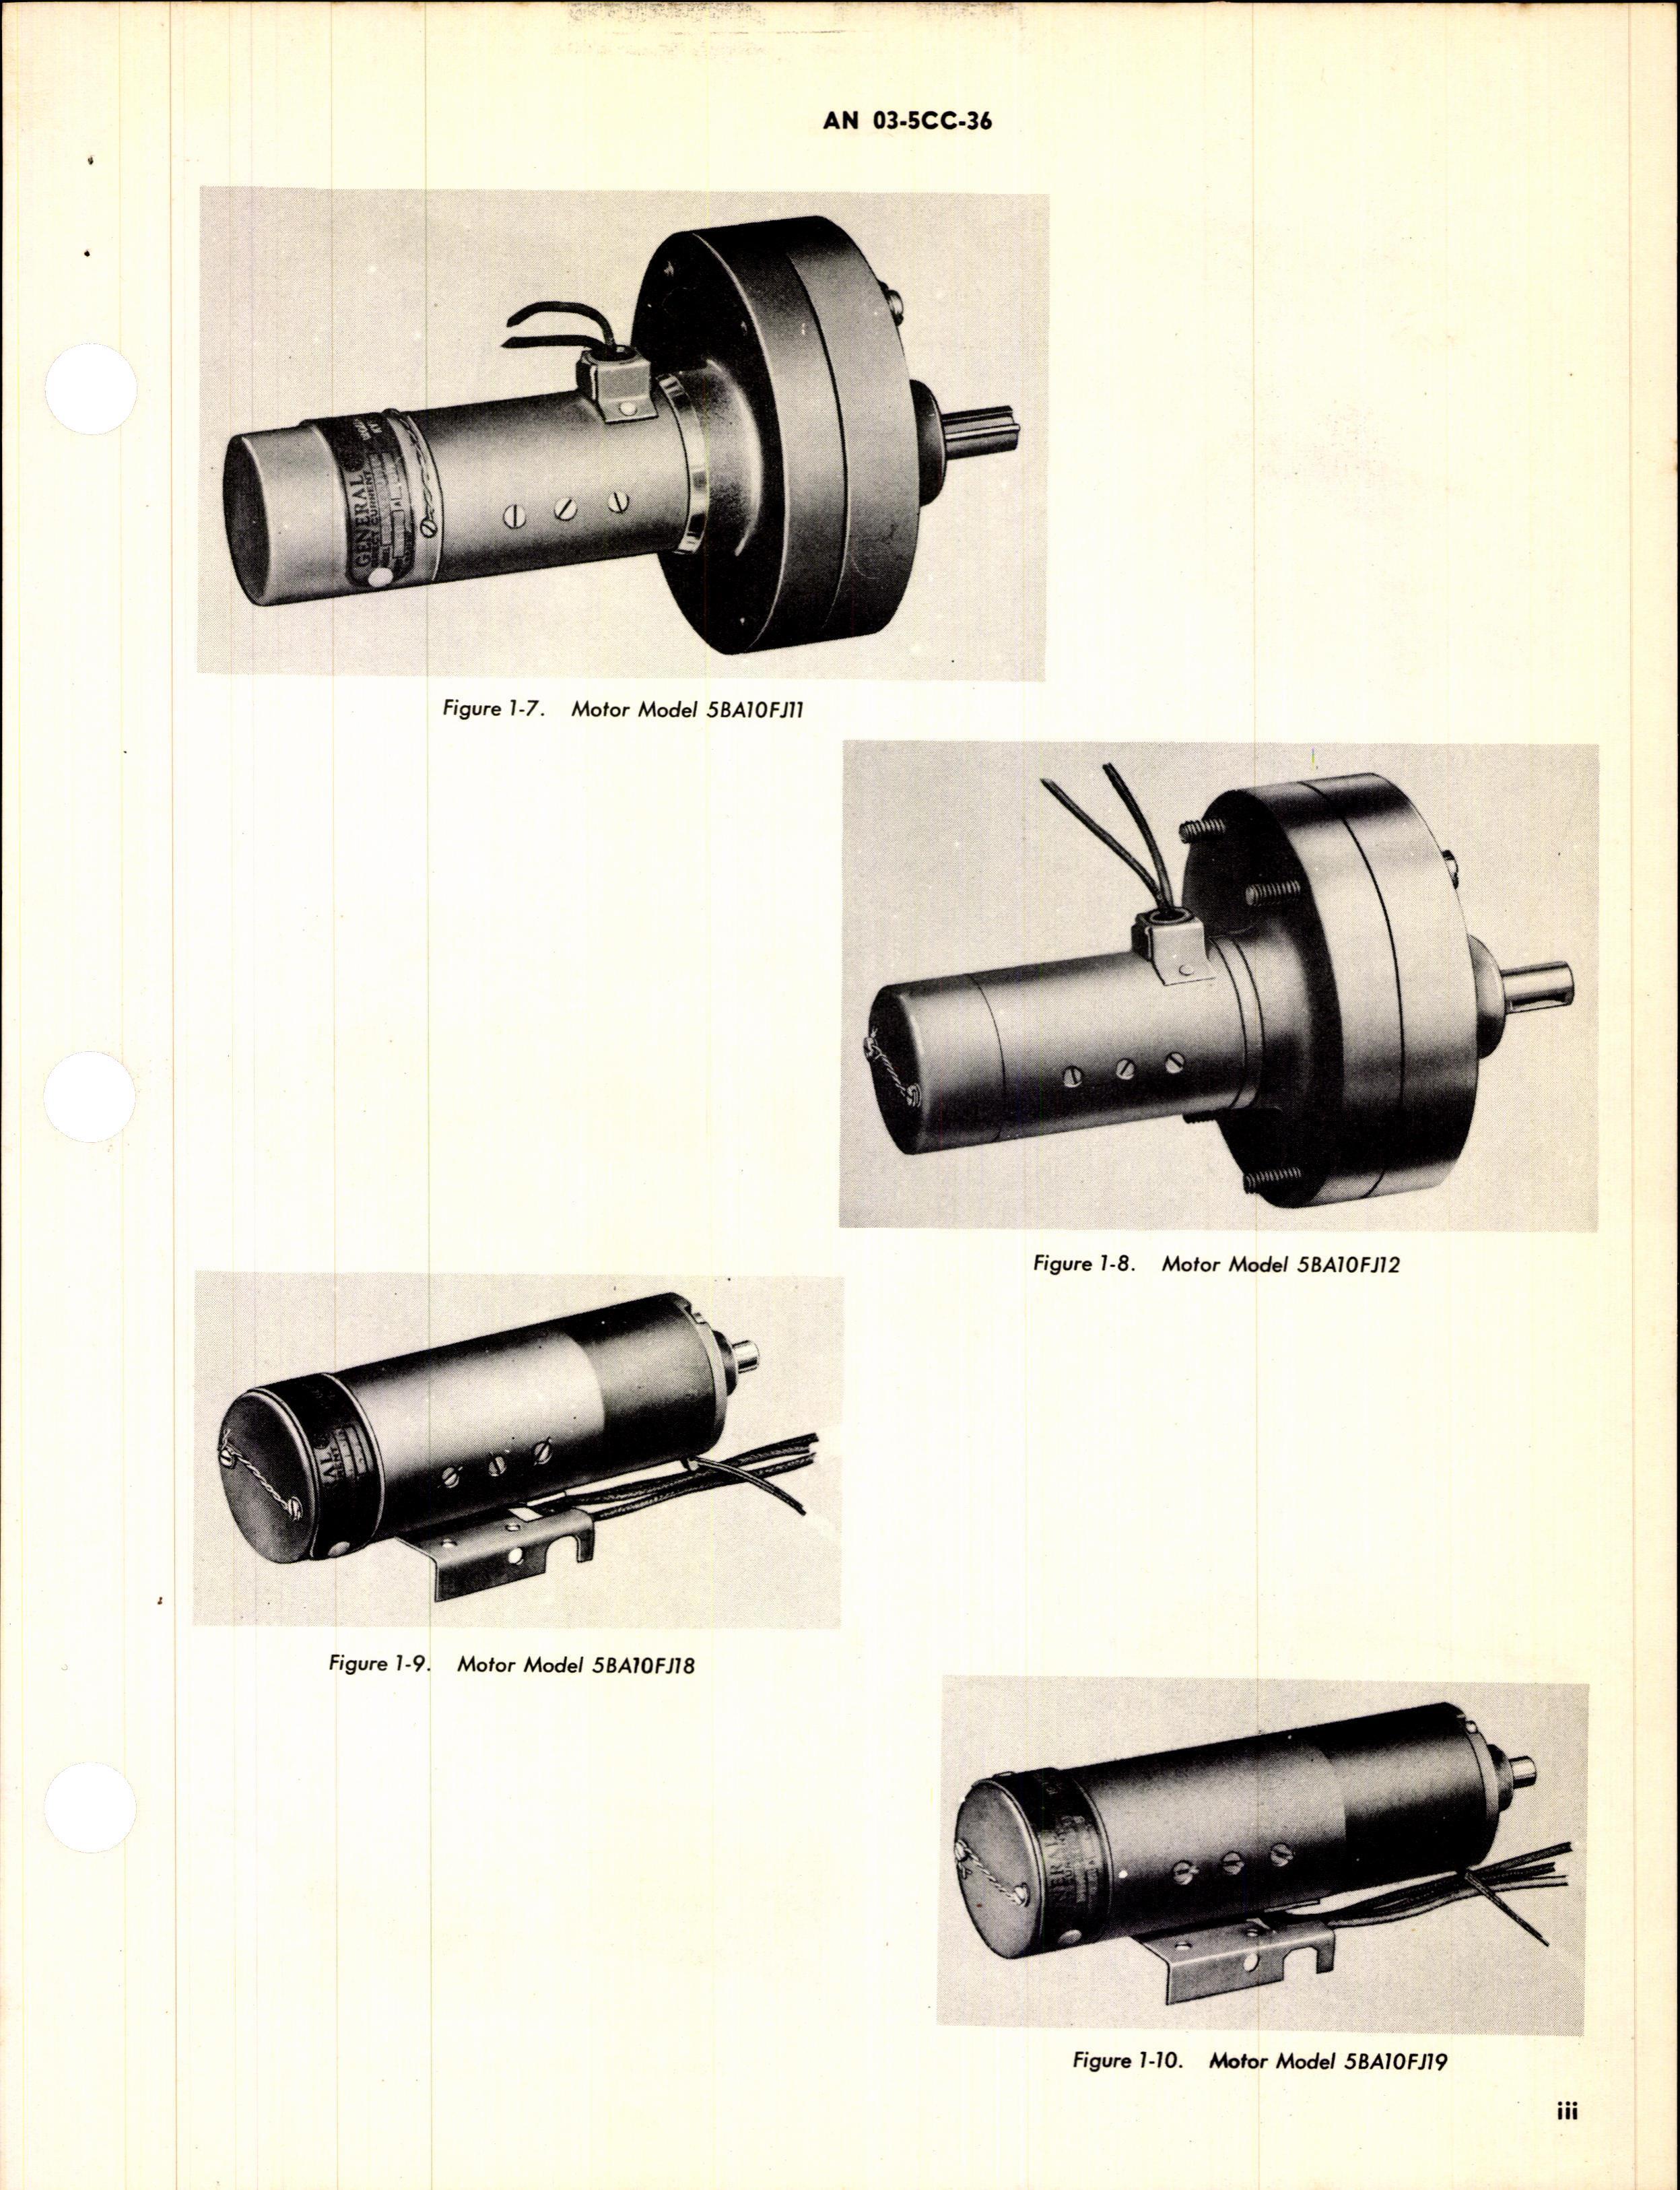 Sample page 5 from AirCorps Library document: Overhaul Instructions for Aircraft Motors Series 5BA10